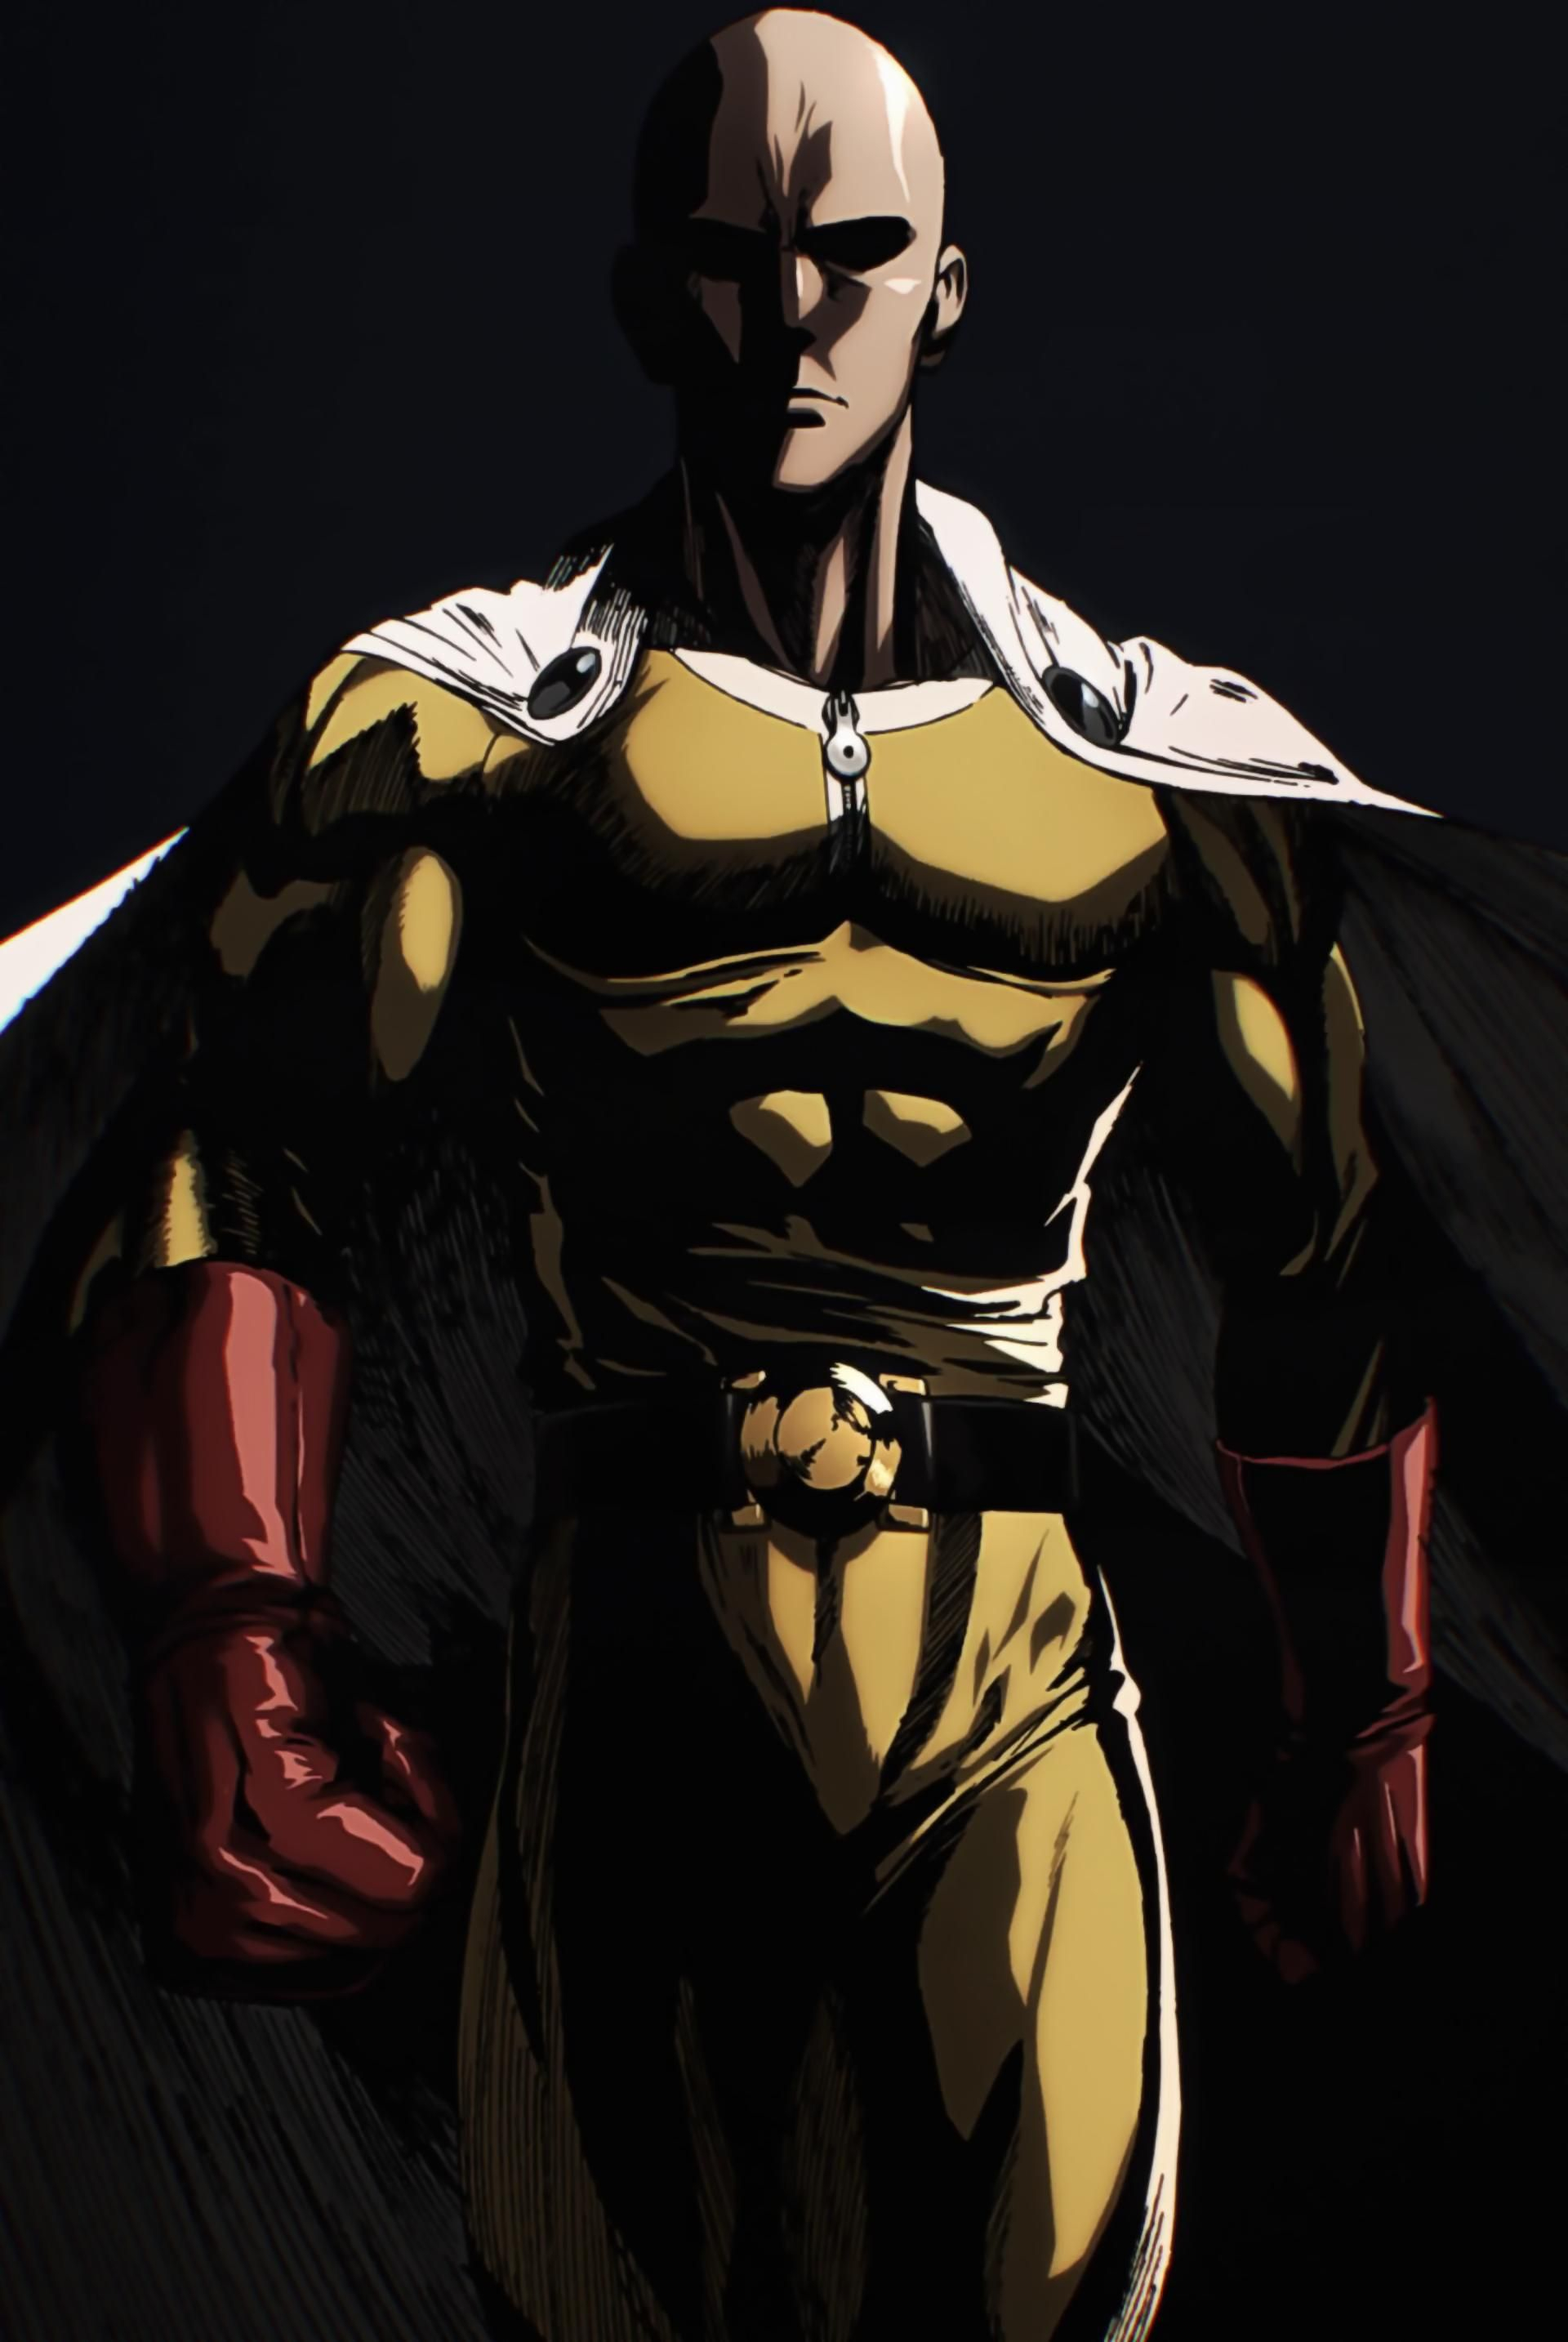 1920x2867 Rendered out some [ONE PUNCH MAN] wallpapers because not enough bald guys in yellow leotard on this&acirc;&#128;&brvbar; | One punch man anime, Saitama one punch man, Saitama one punch